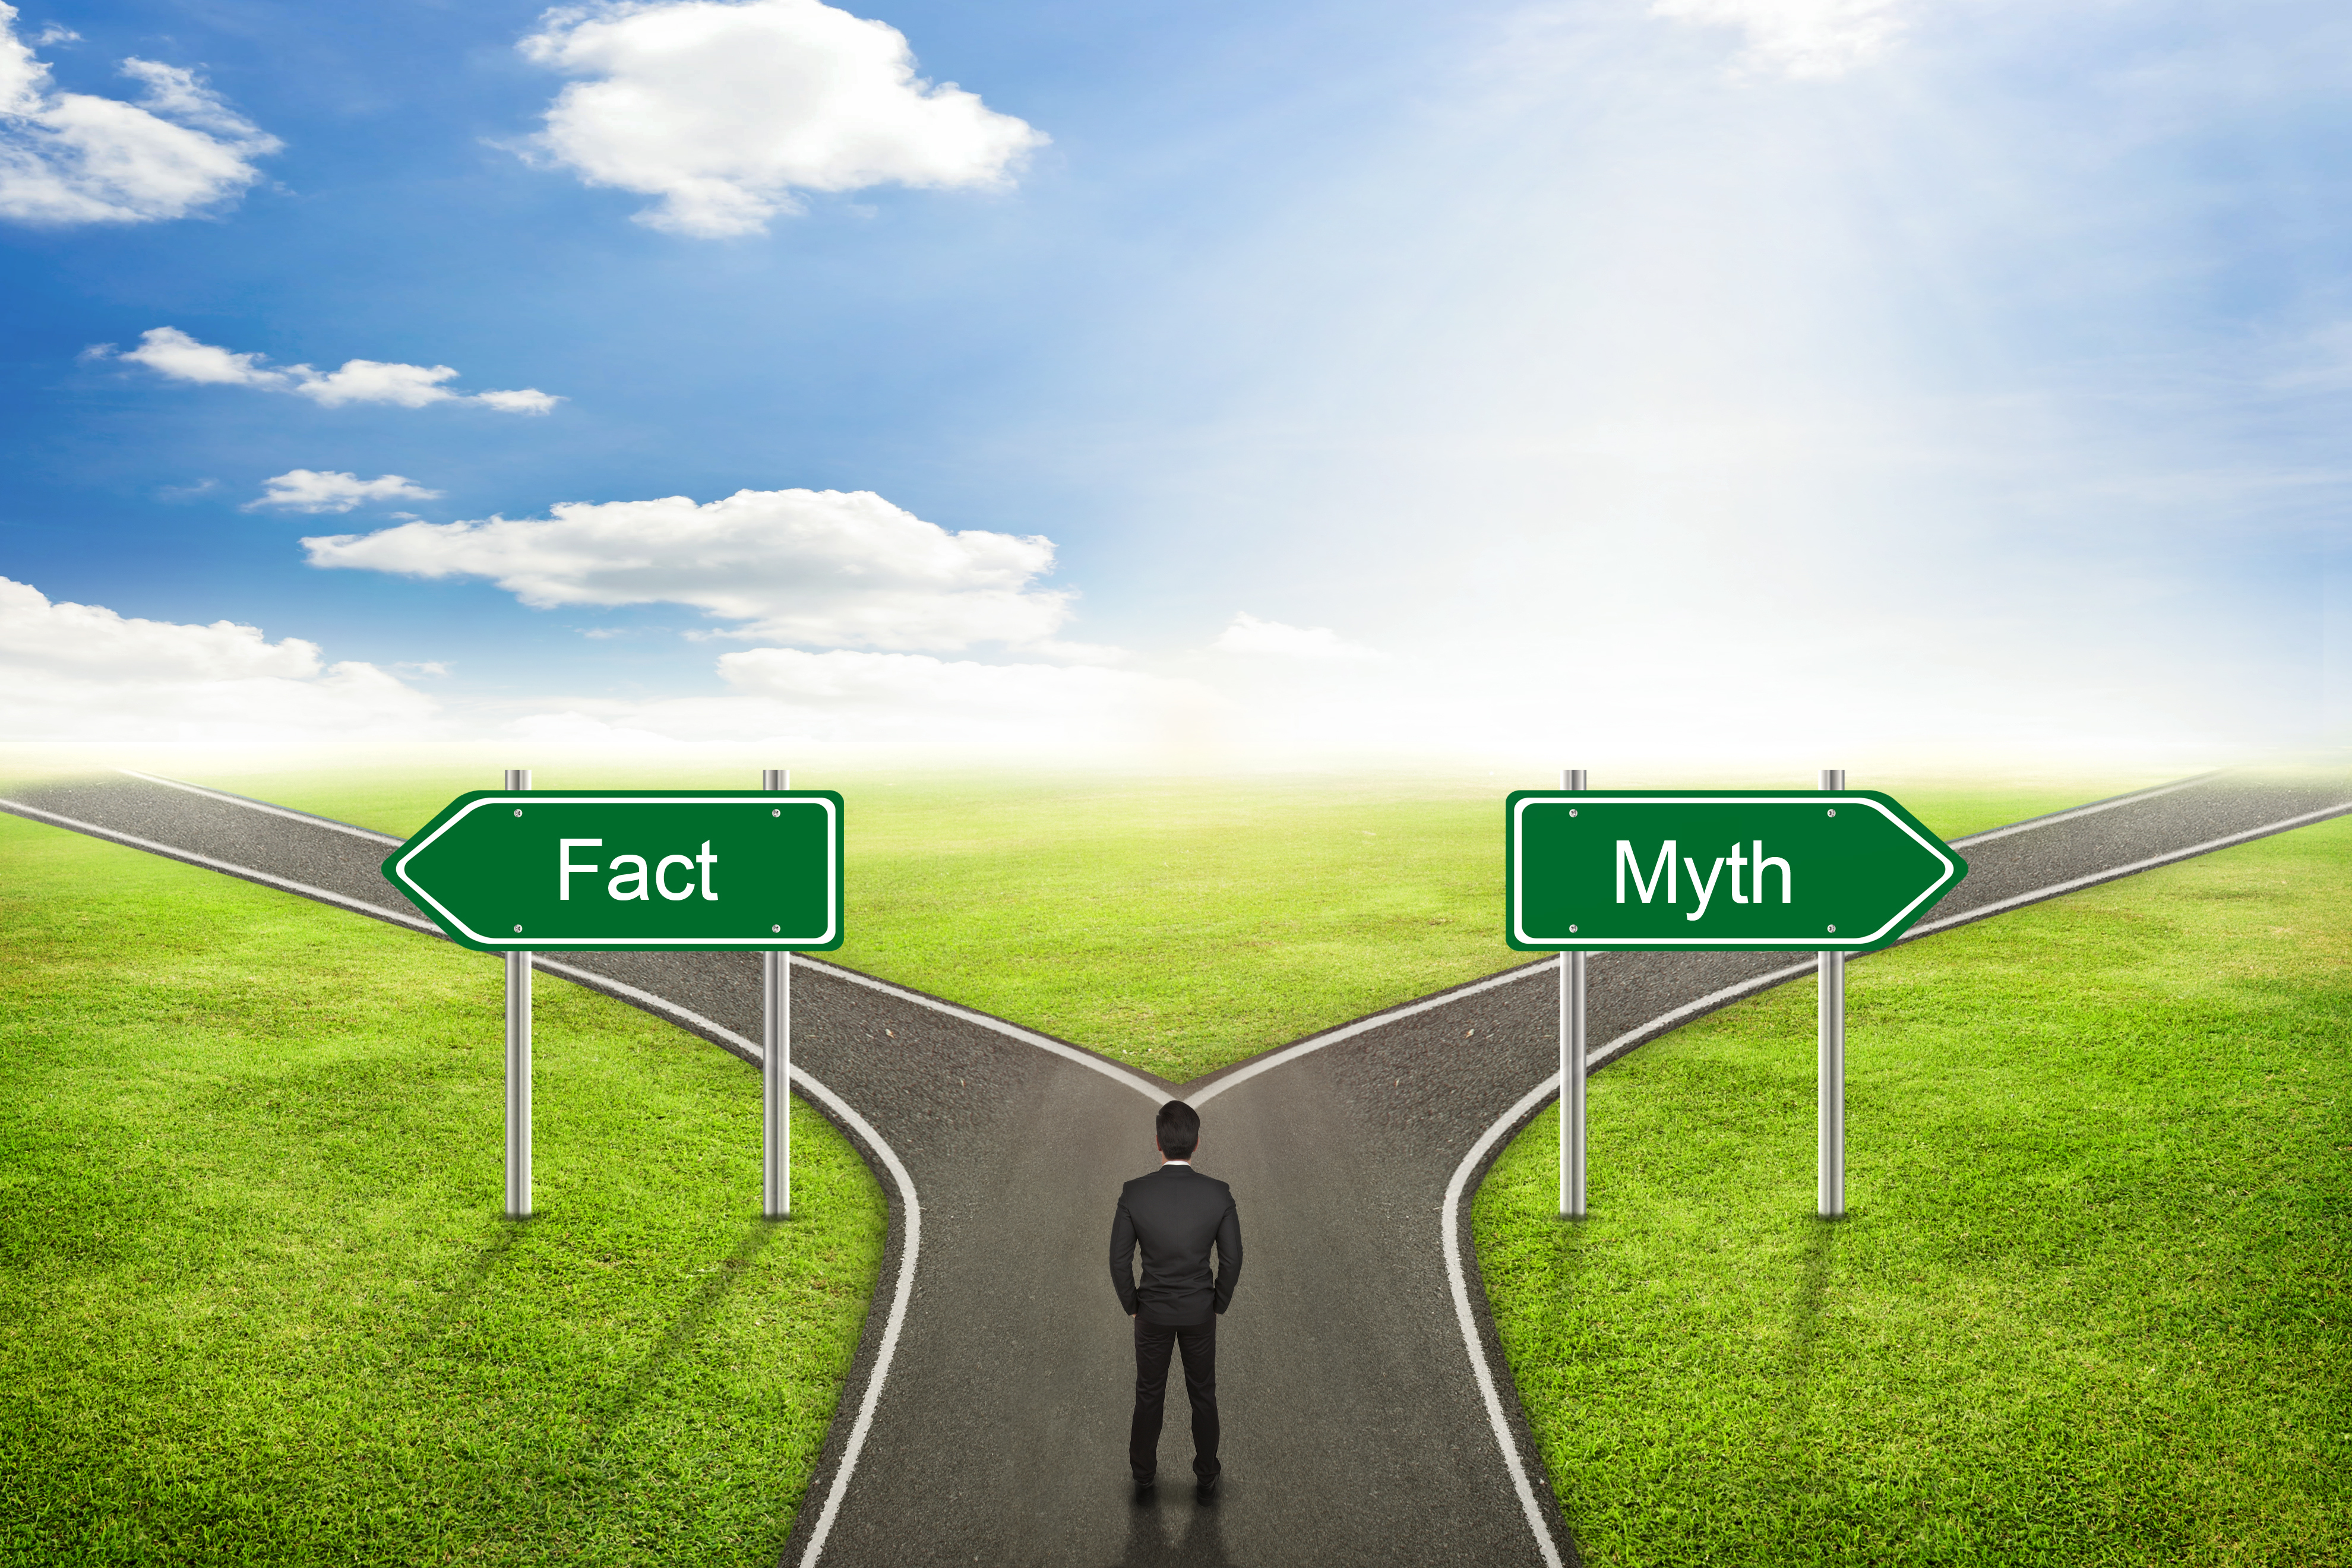 Businessman concept; choose Fact or Myth road the correct way.